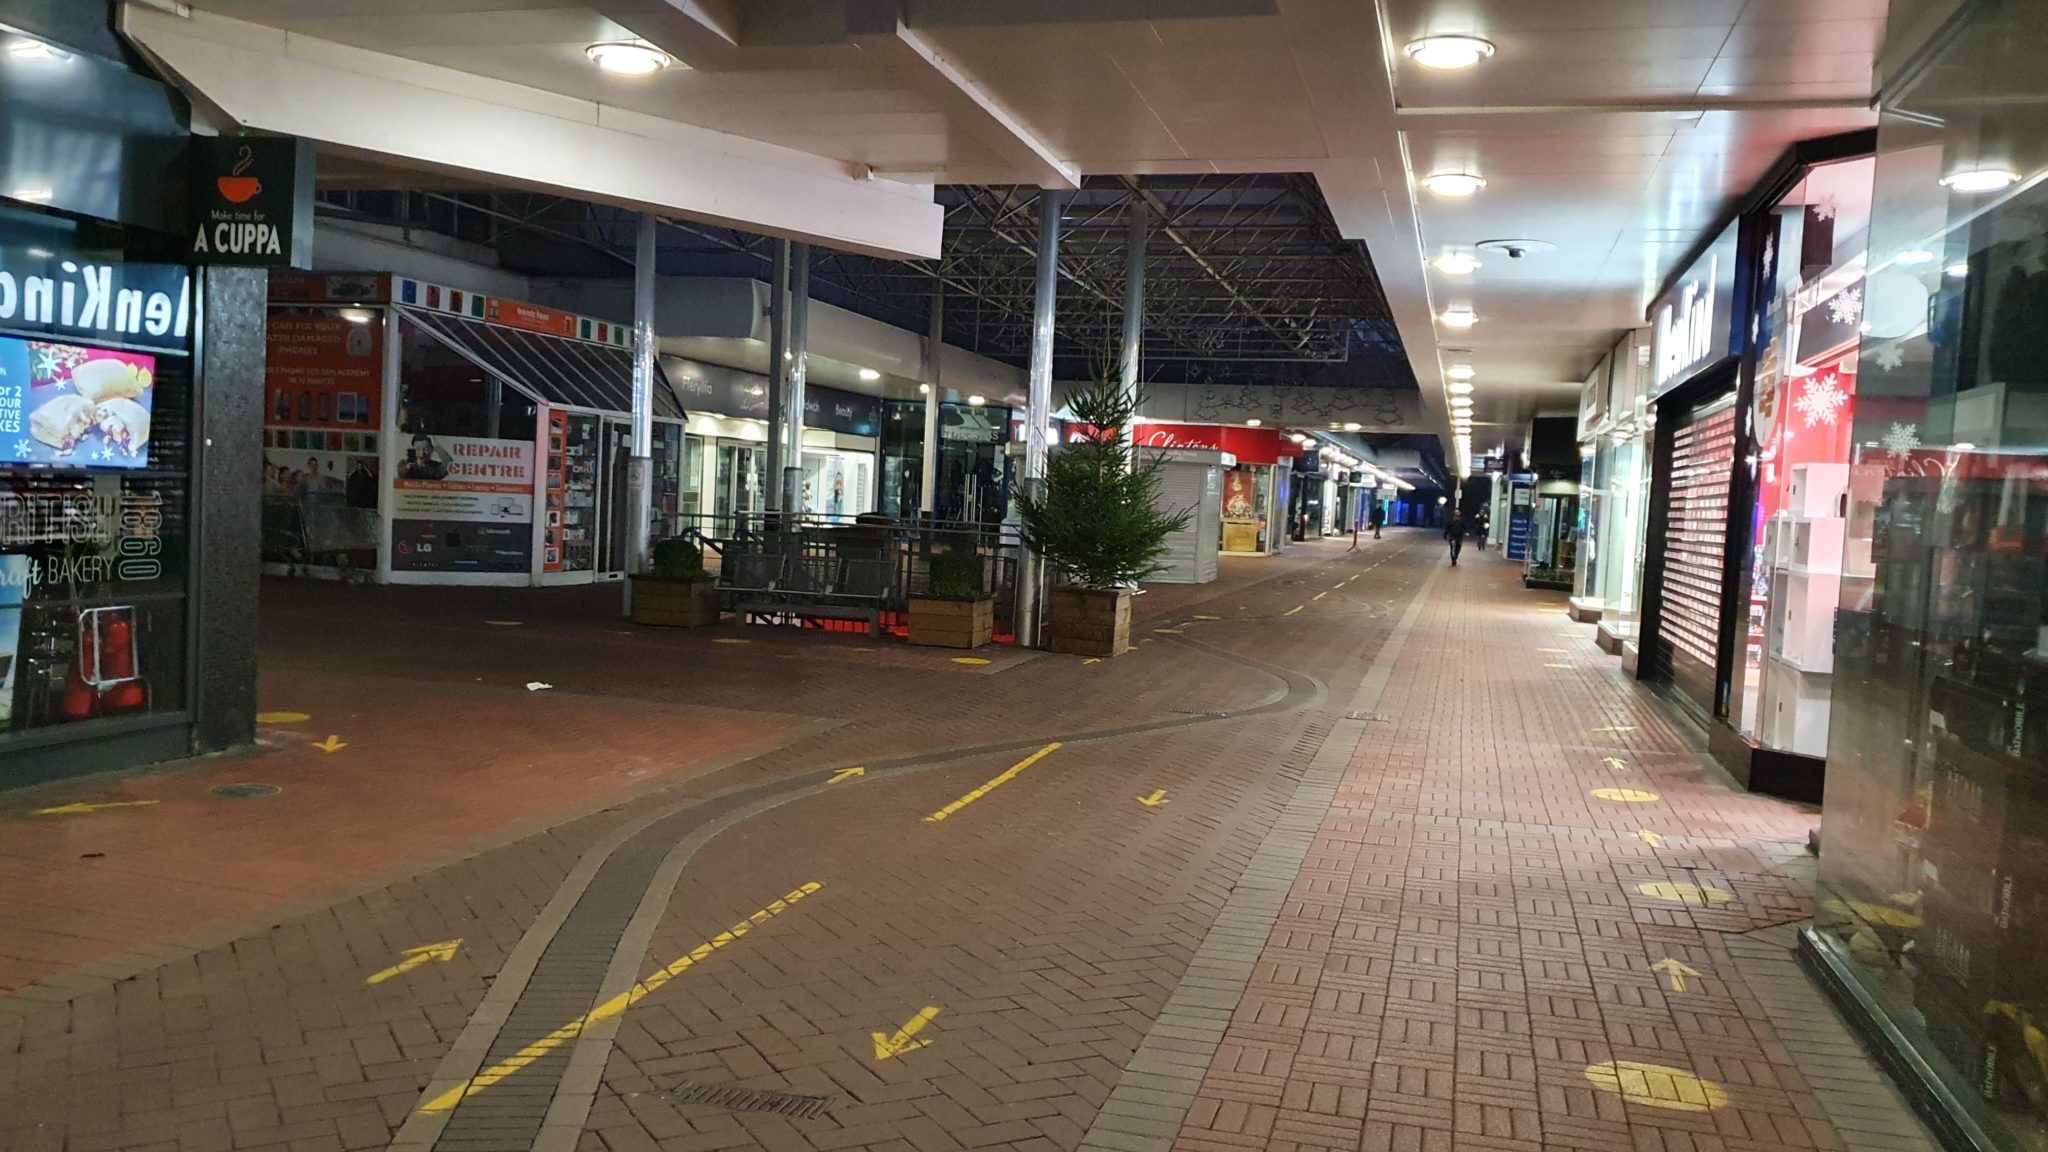 Shops in Cwmbran town centreShops in Cwmbran town centre